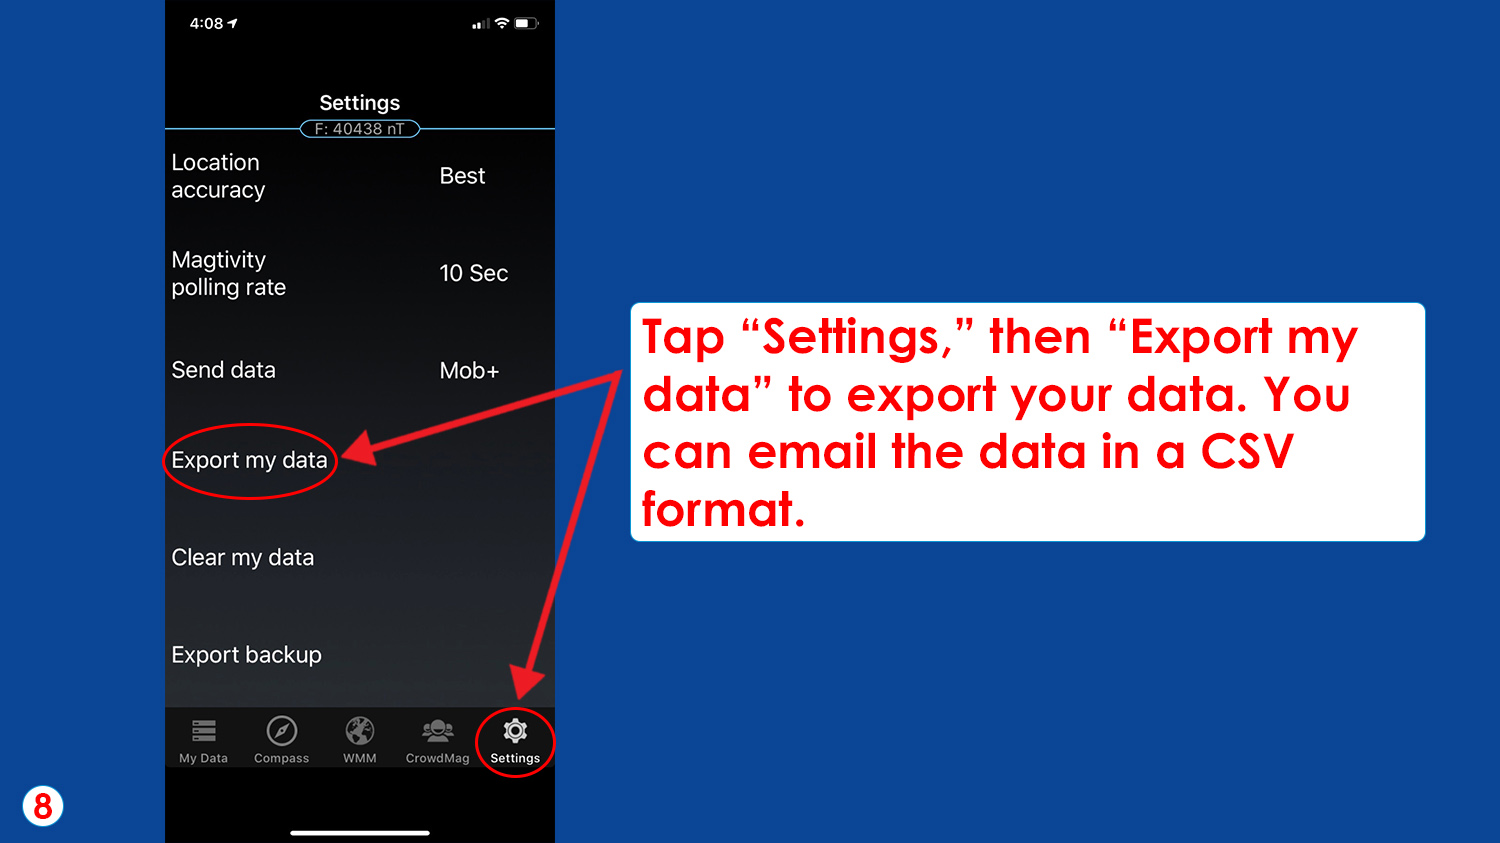 Tap “Settings,” then “Export my data” to export your data. You can email the data in a CSV format. 